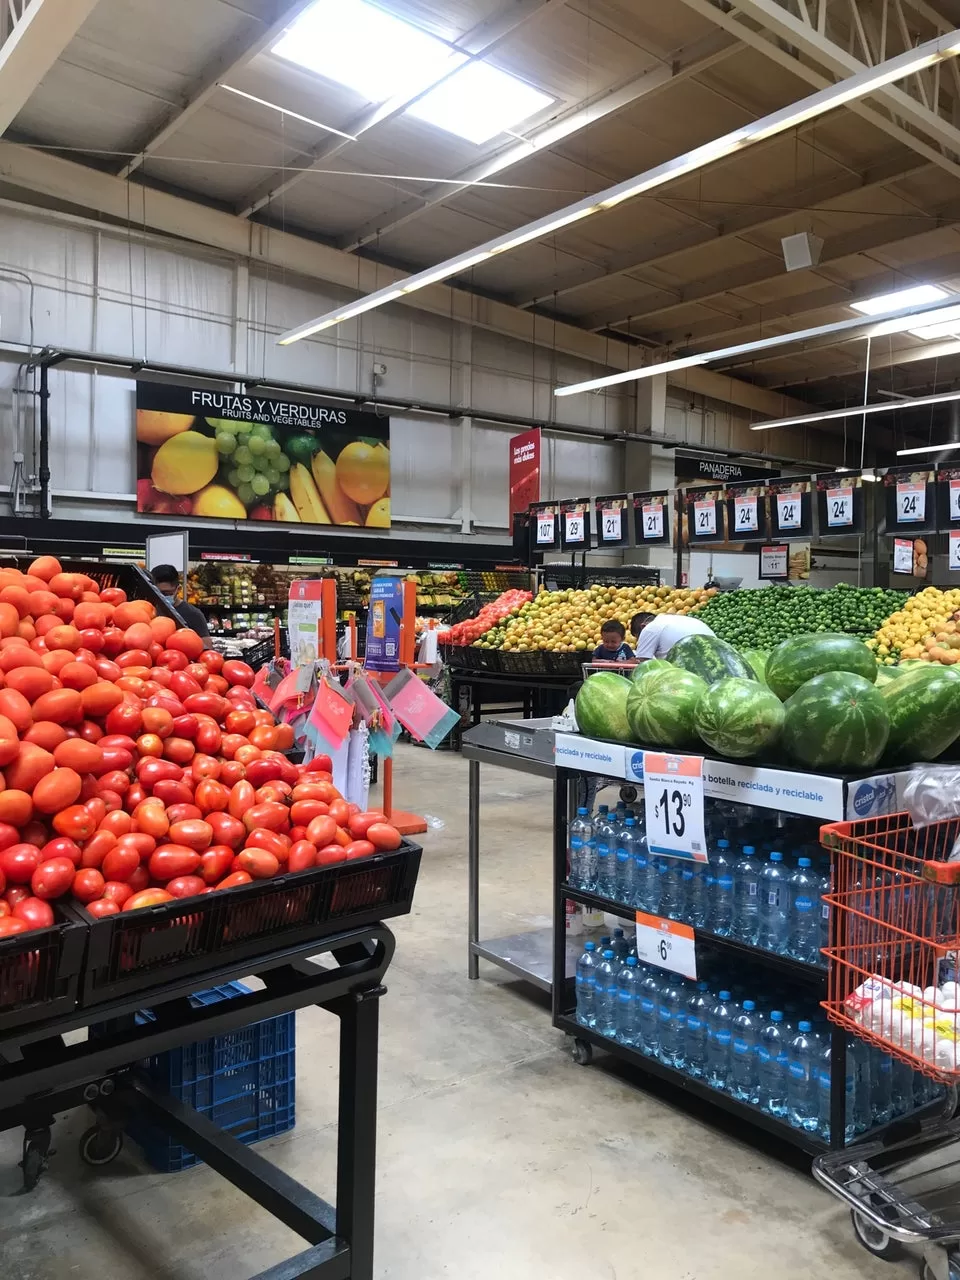 Image of the produce section of Super Chedraui in the colonia.